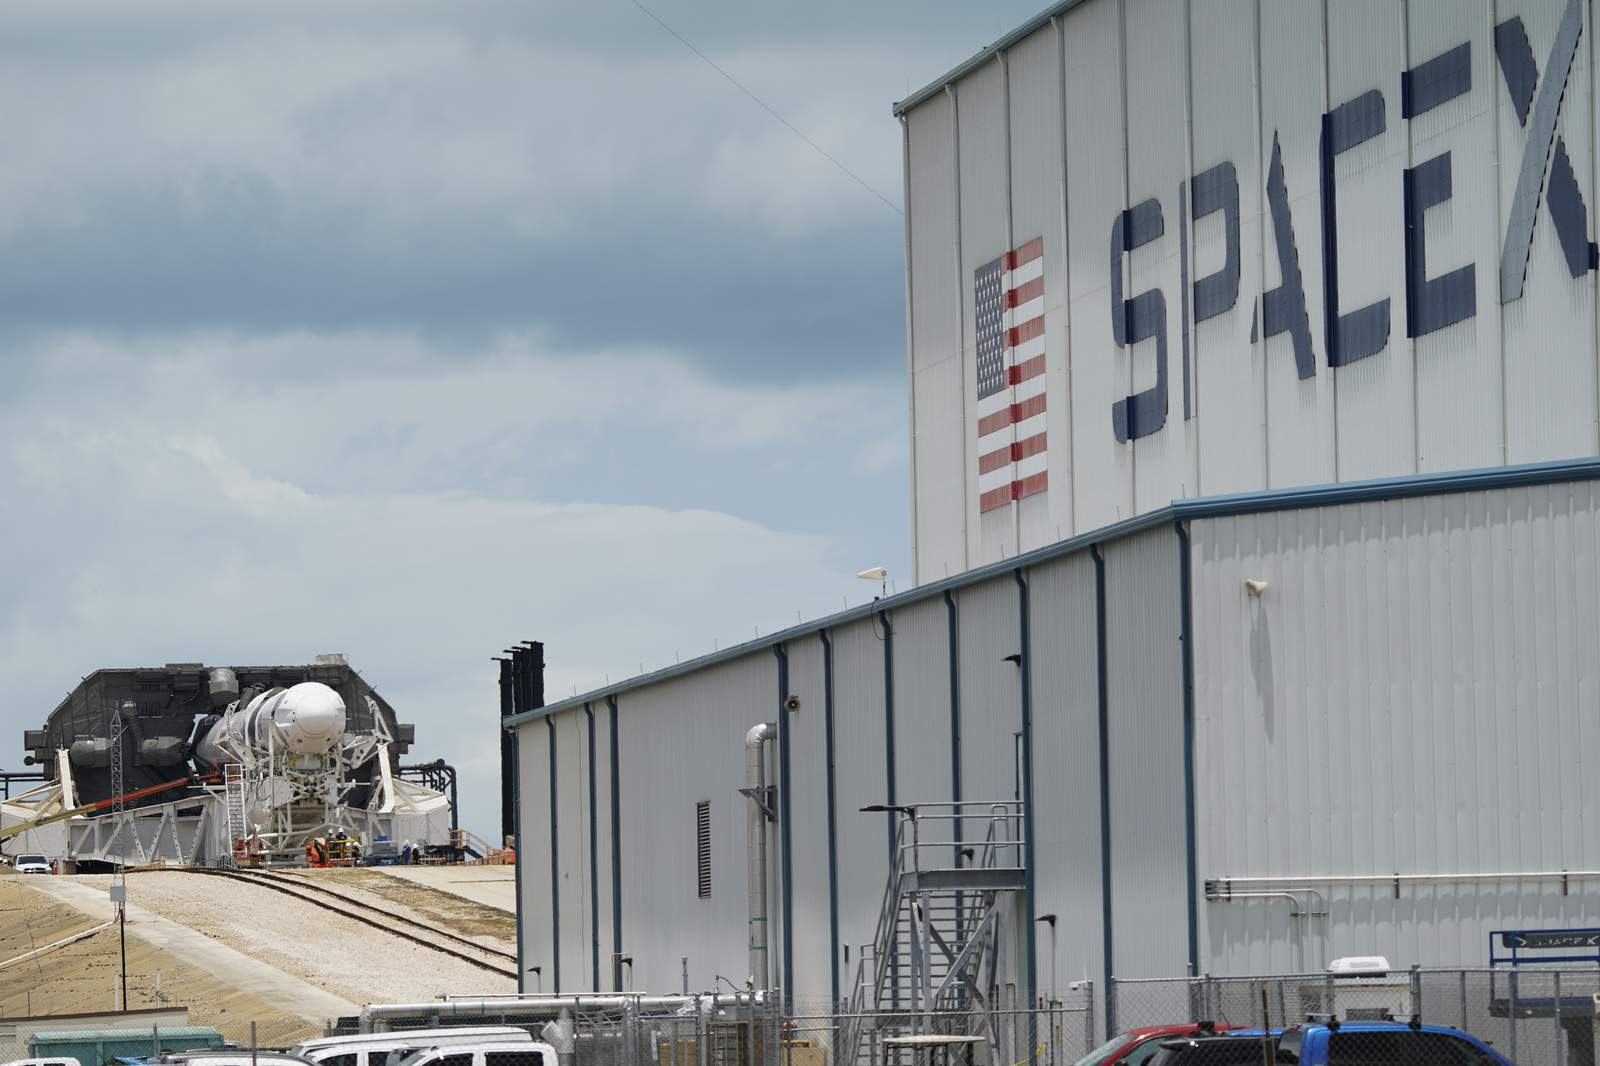 Heres everything you need to know about SpaceXs historic astronaut launch